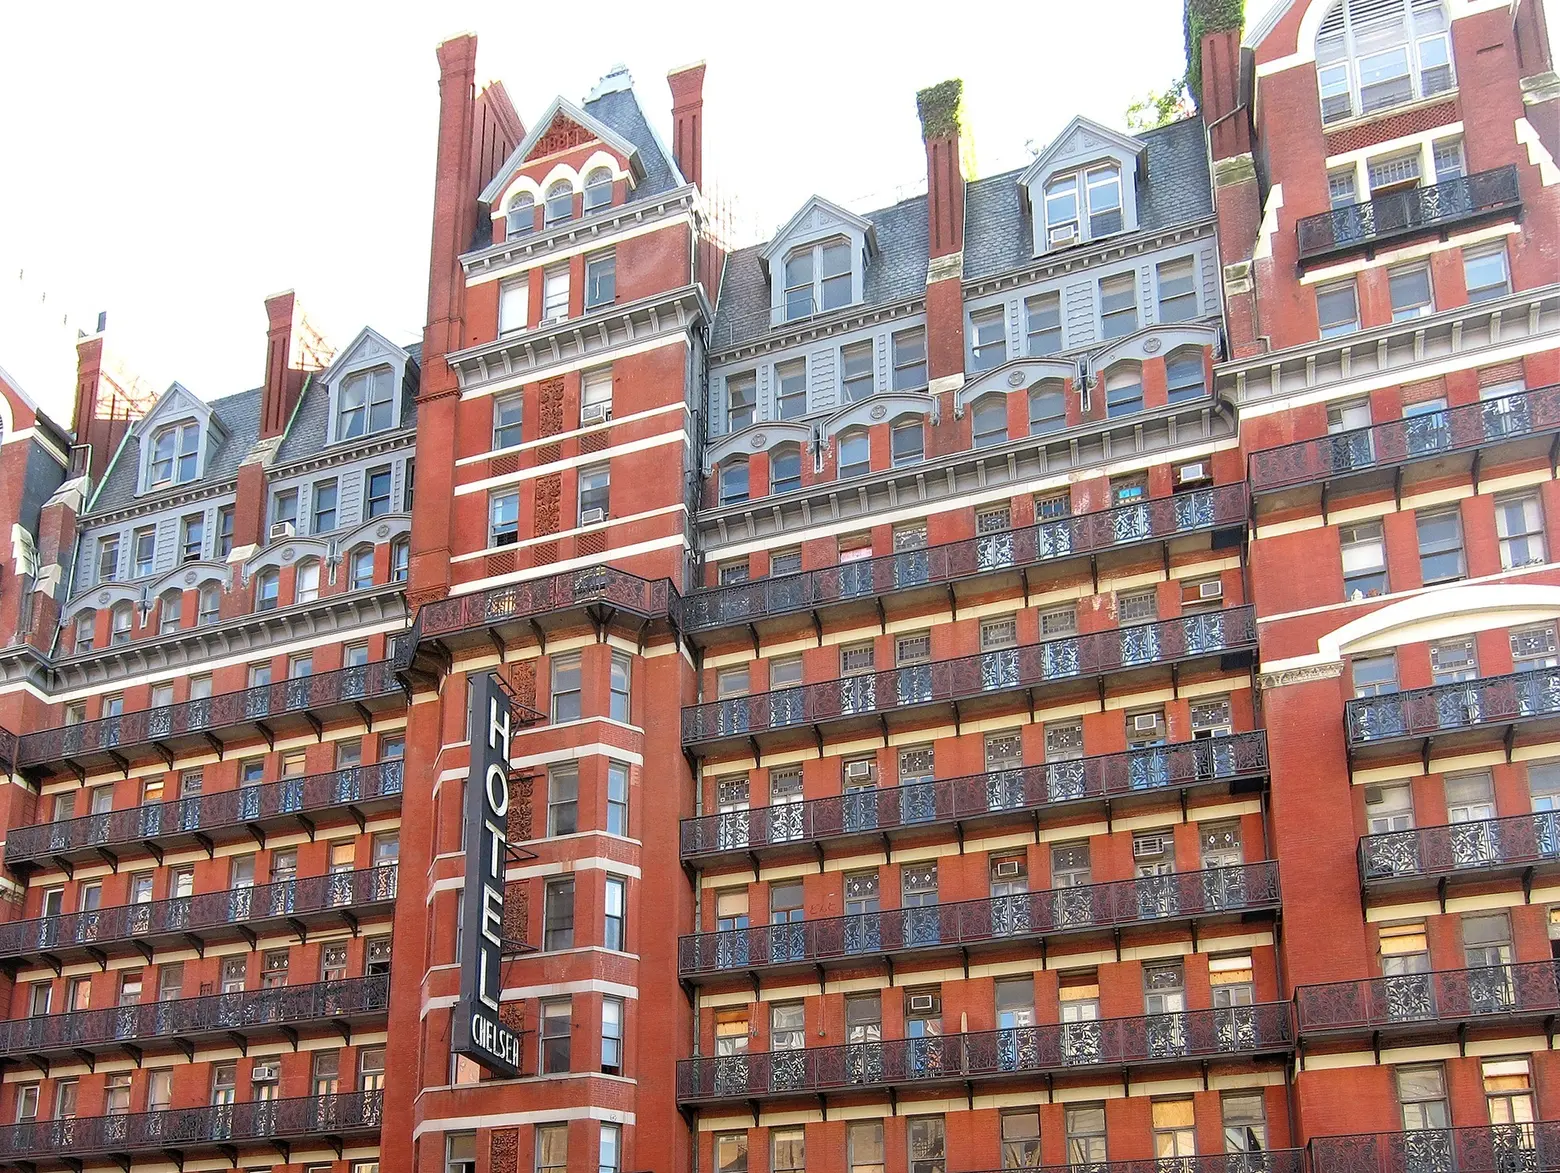 Hoteliers buy historic Hotel Chelsea for $250M, will redevelop as condos and hotel